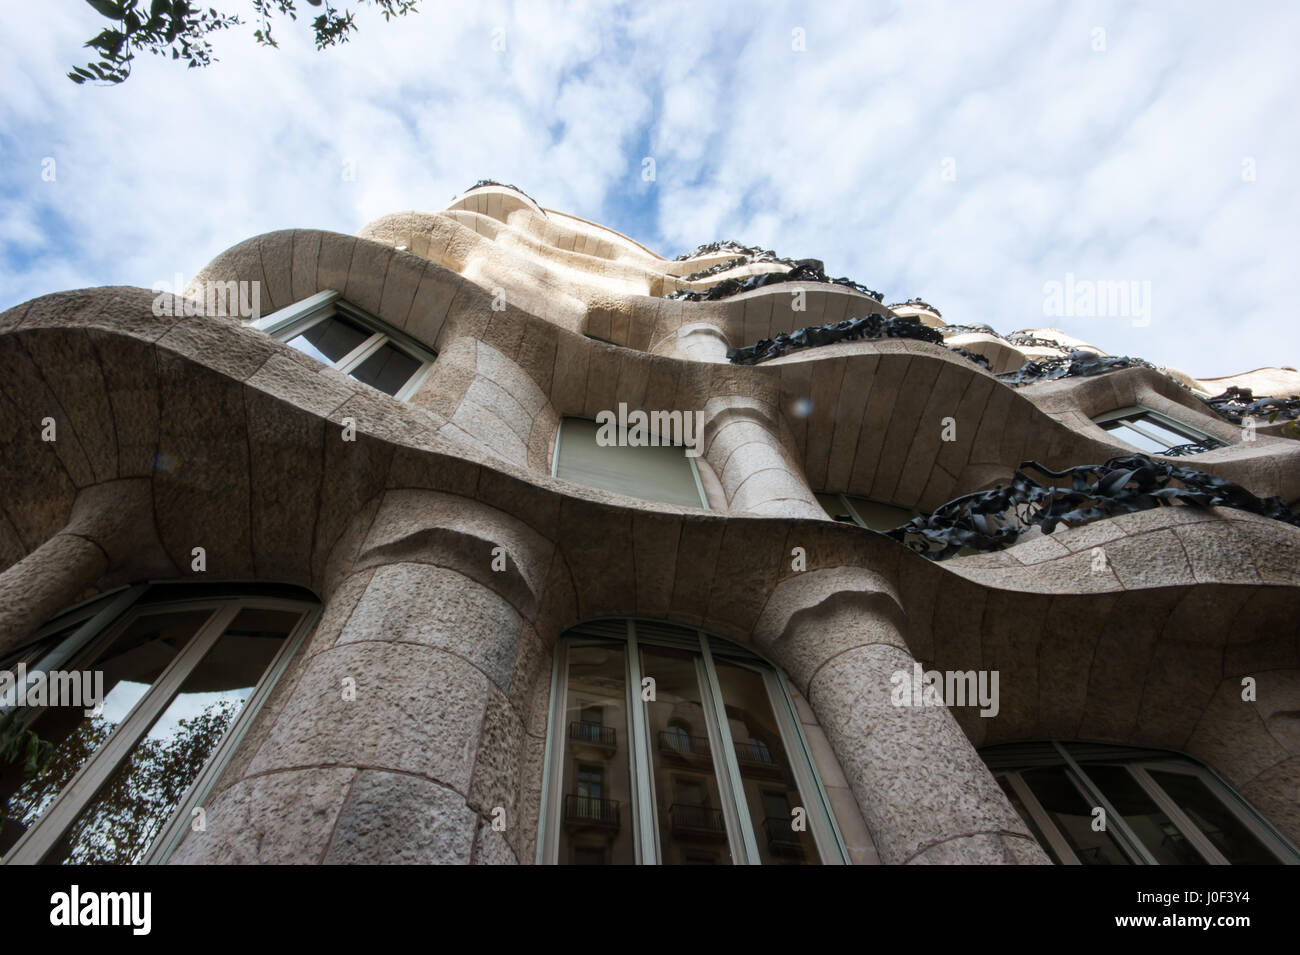 Antoni Gaudí, Casa Milà house, also known as La Pedrera, 1906-1912, Catalan Modernist architecture, Barcelona, Spain, view from below Stock Photo